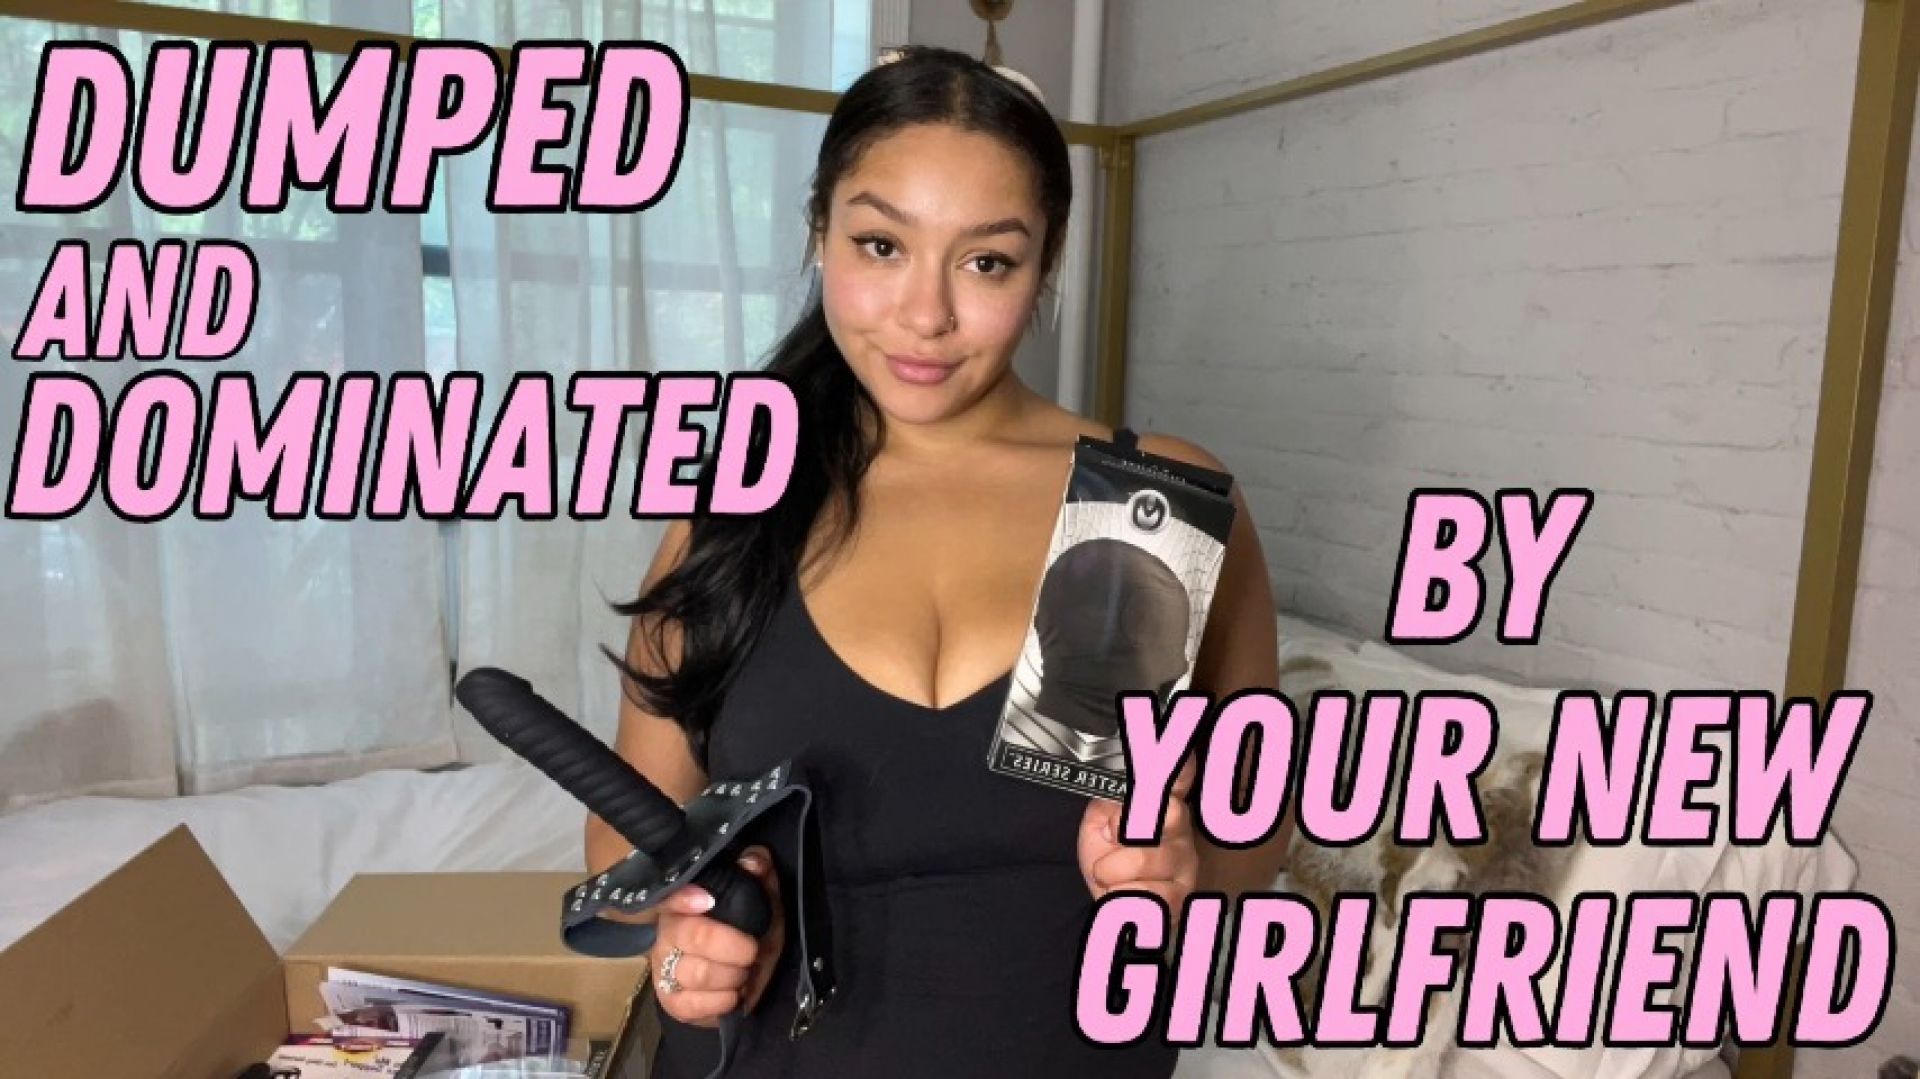 Dumped And Dominated: FemDom Girlfriend Roleplay